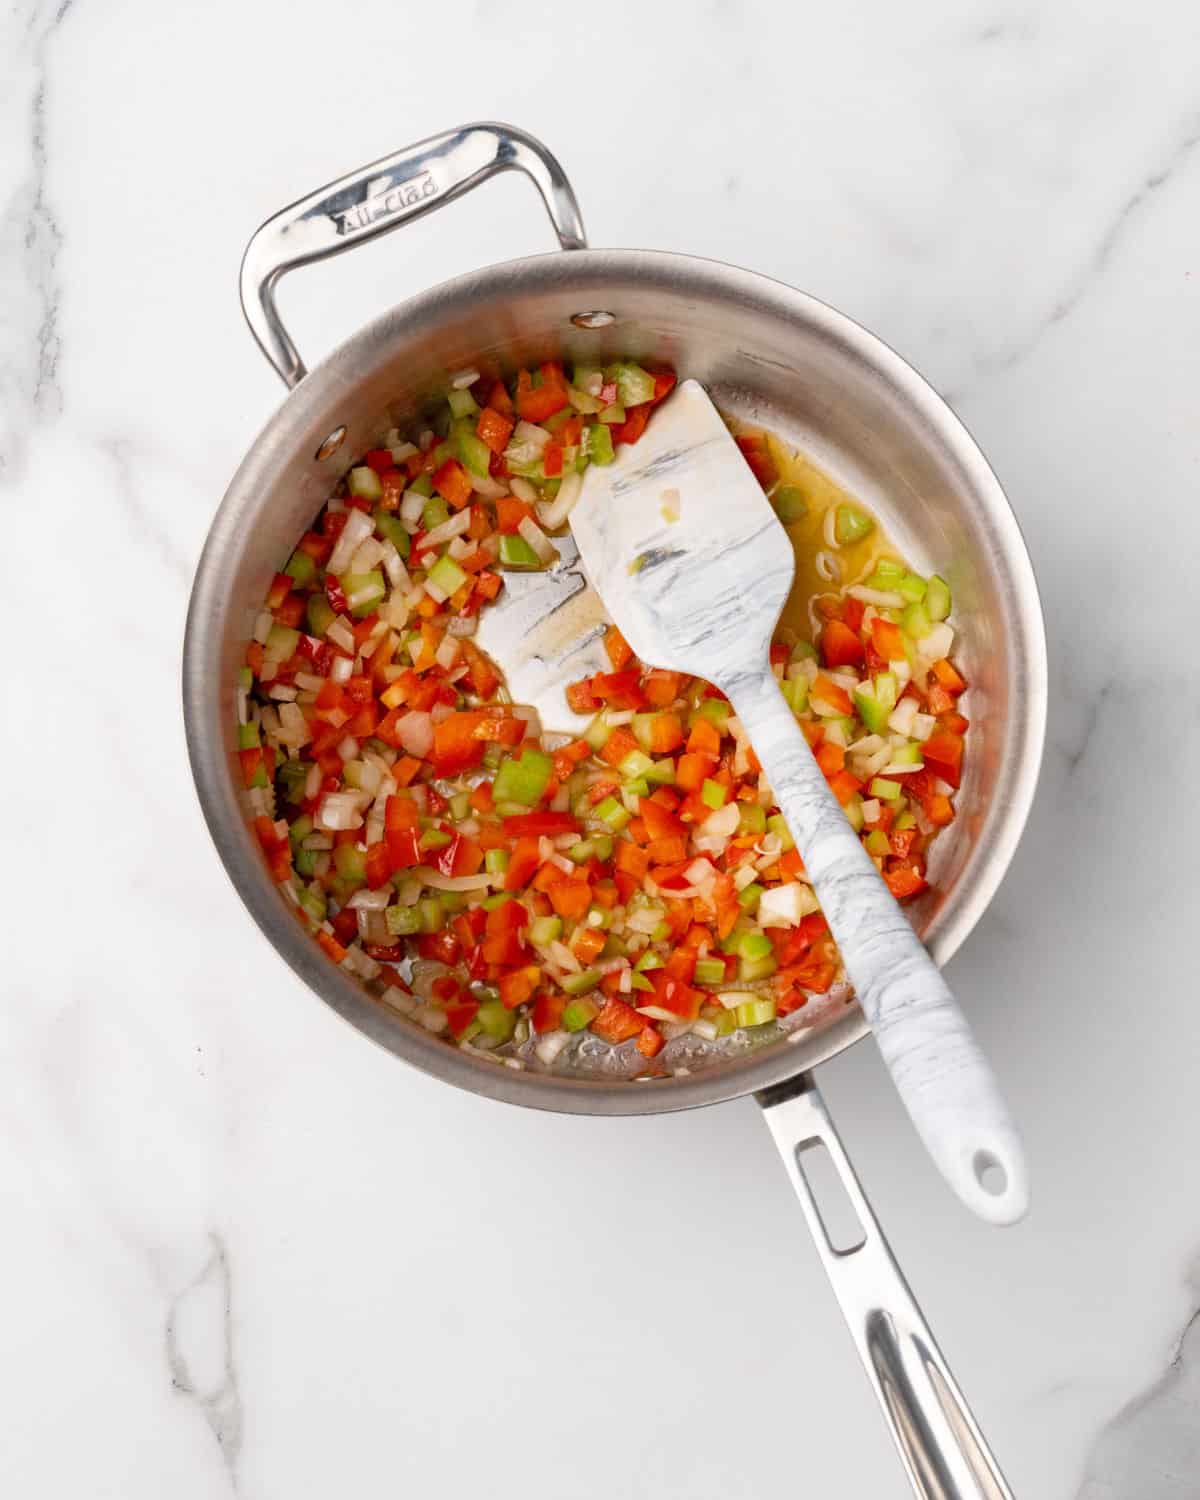 Metal pot with diced vegetables and a spatula on a white marble surface.